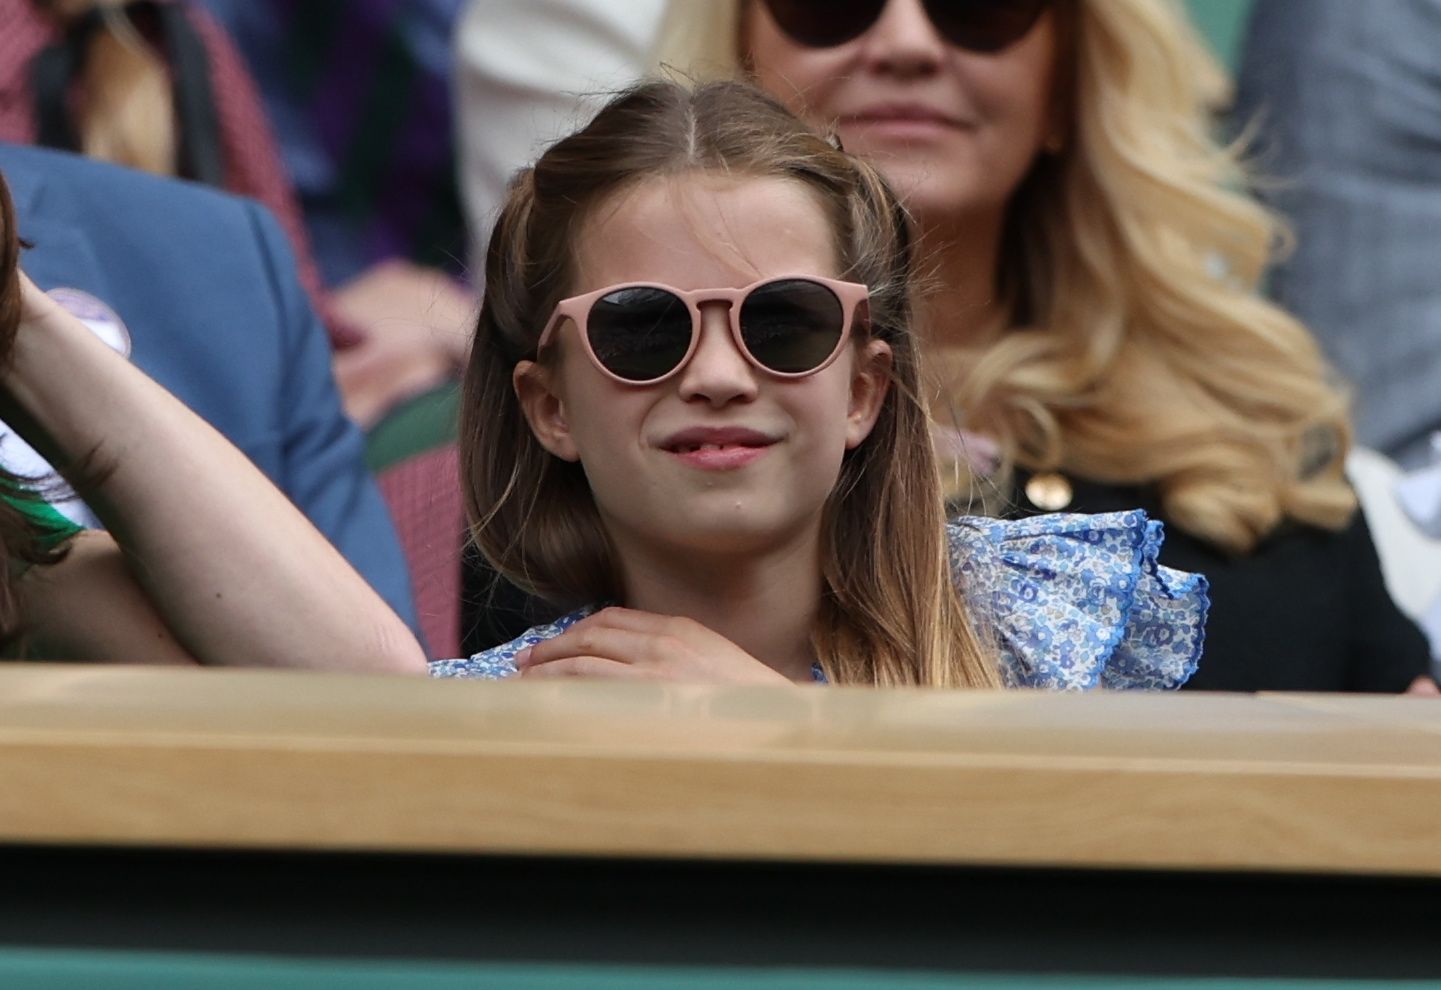 <p>Princess Charlotte wore a pint-sized pair of sunglasses as she watched the Men's Singles final match from the Royal Box on Centre Court on day 14 of the <a href="https://www.wonderwall.com/celebrity/wimbledon-2023-the-best-pictures-of-royals-and-stars-at-the-tennis-championships-758994.gallery">Wimbledon Tennis Championships</a> at the All England Lawn Tennis and Croquet Club in London on July 16, 2023.</p>